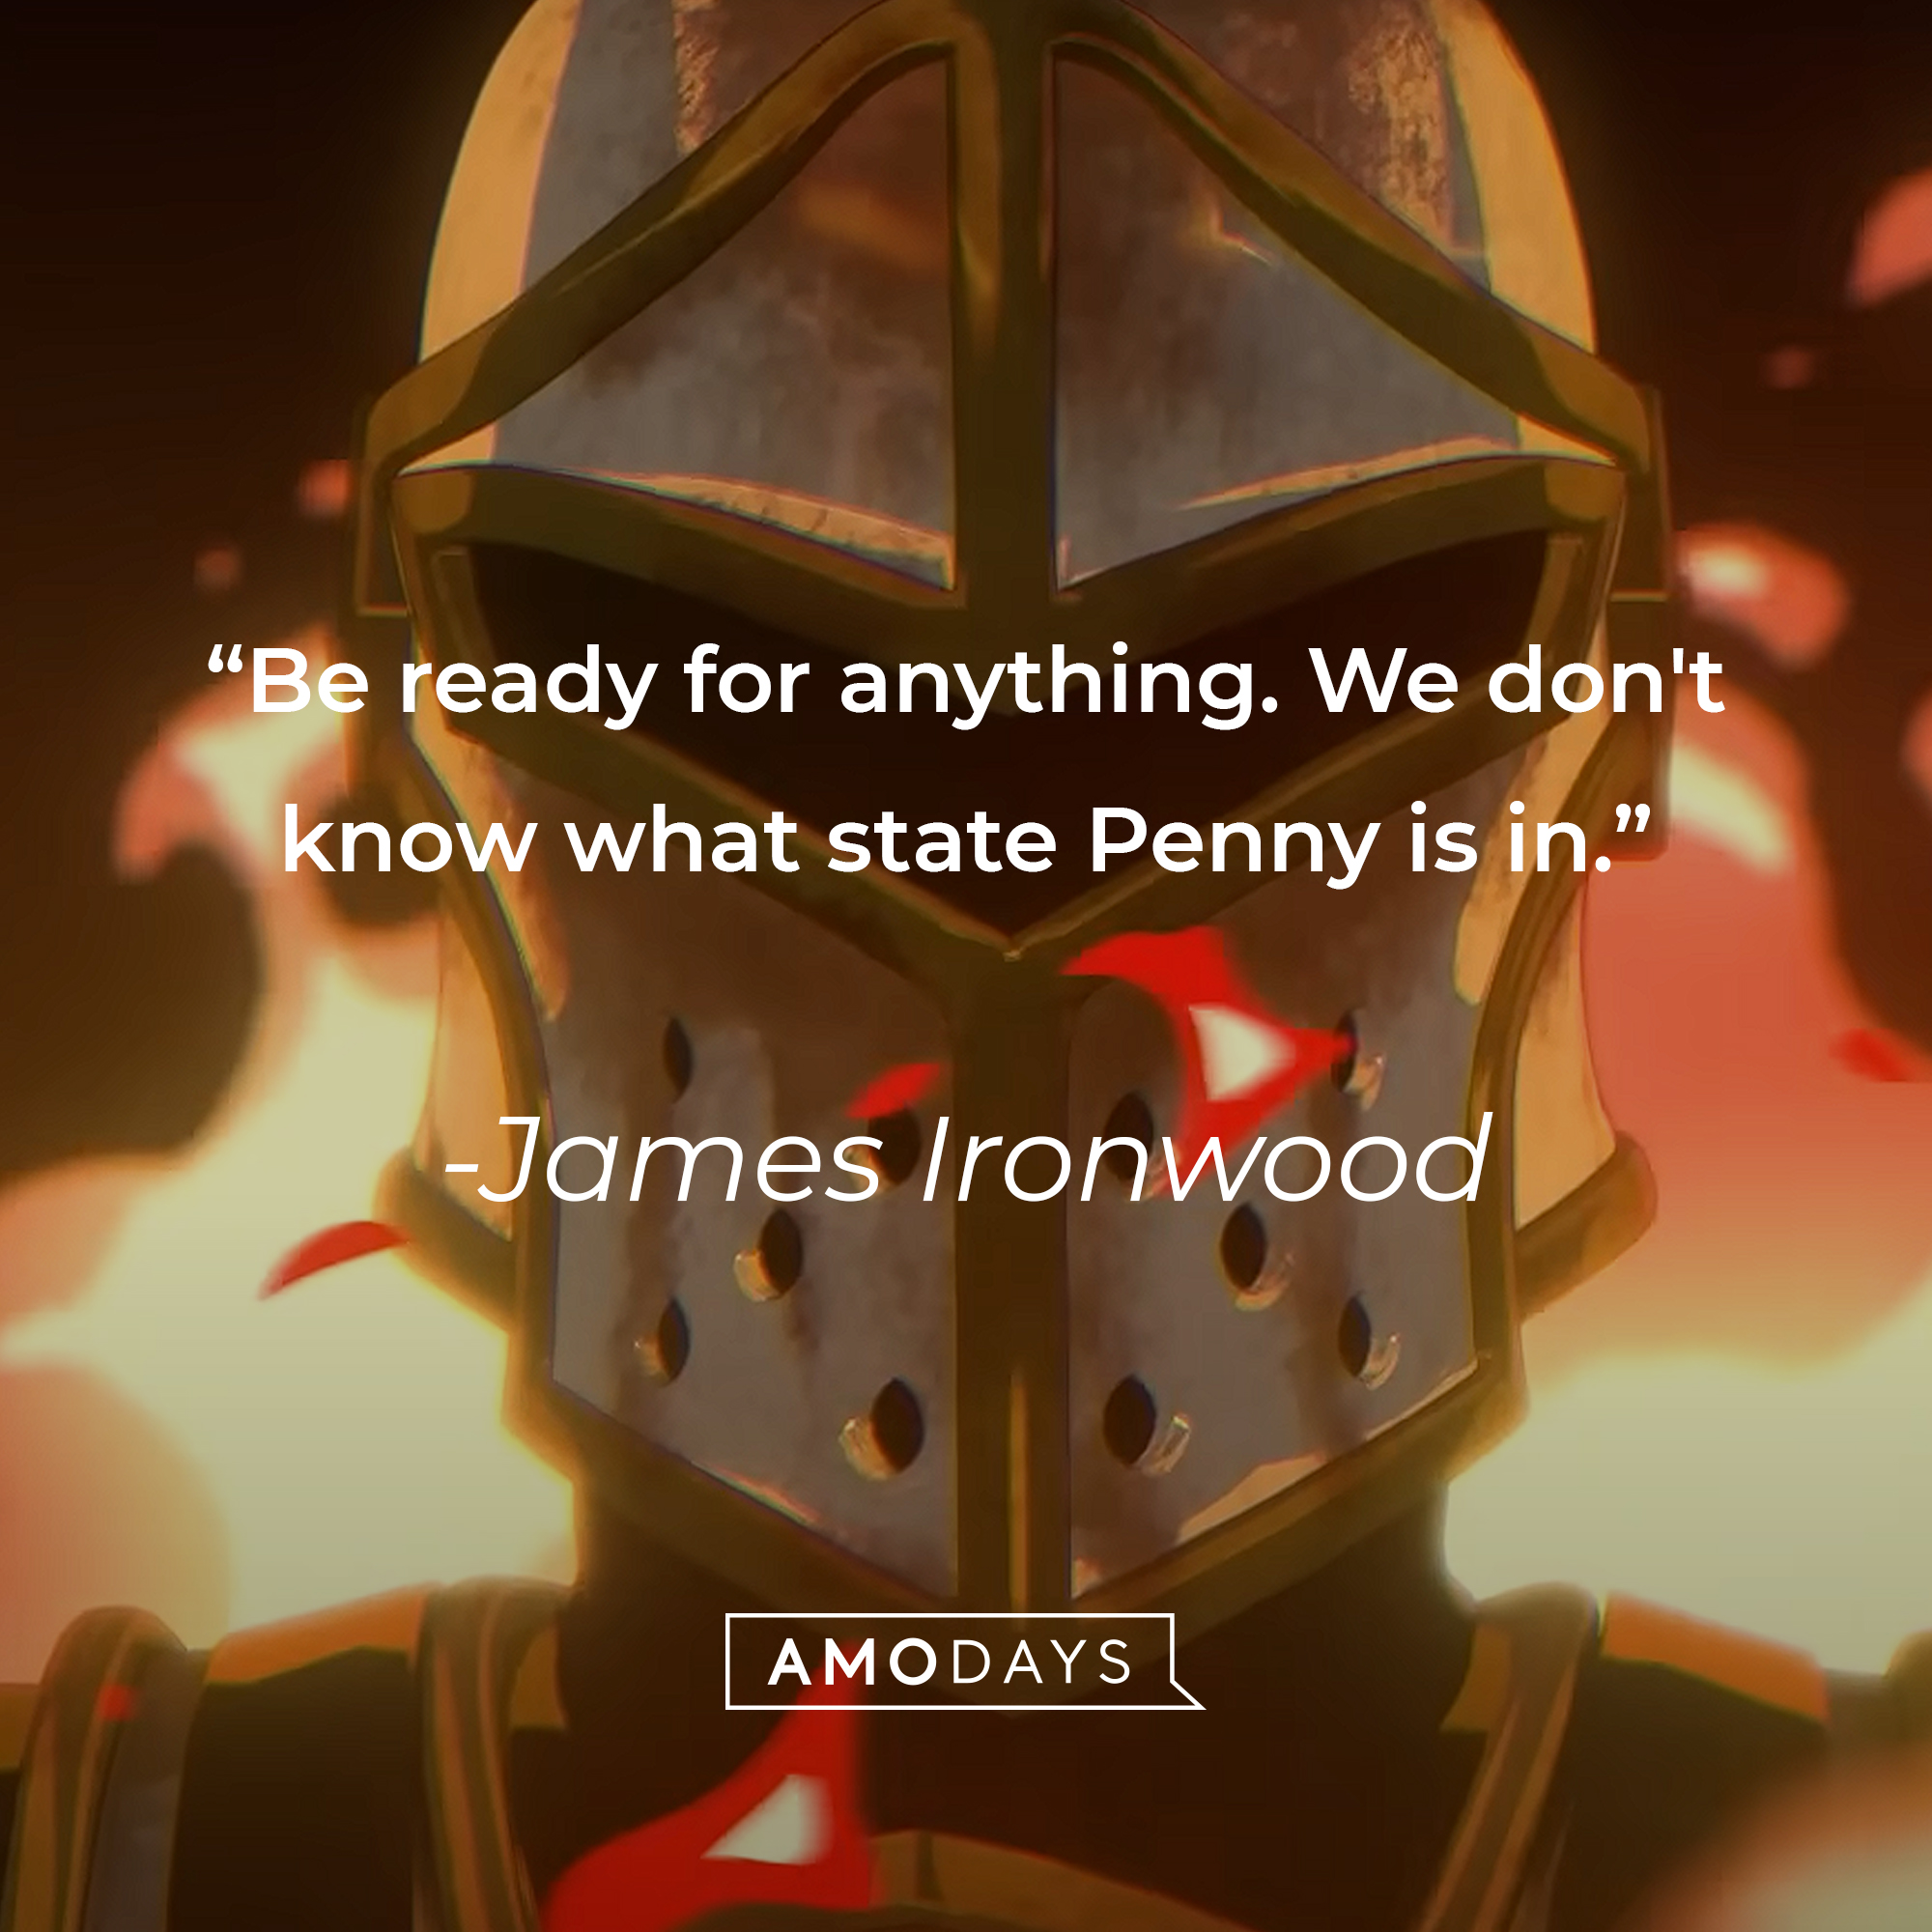 James Ironwood's quote: "Be ready for anything. We don't know what state Penny is in." | Source: Youtube.com/crunchyrolldubs